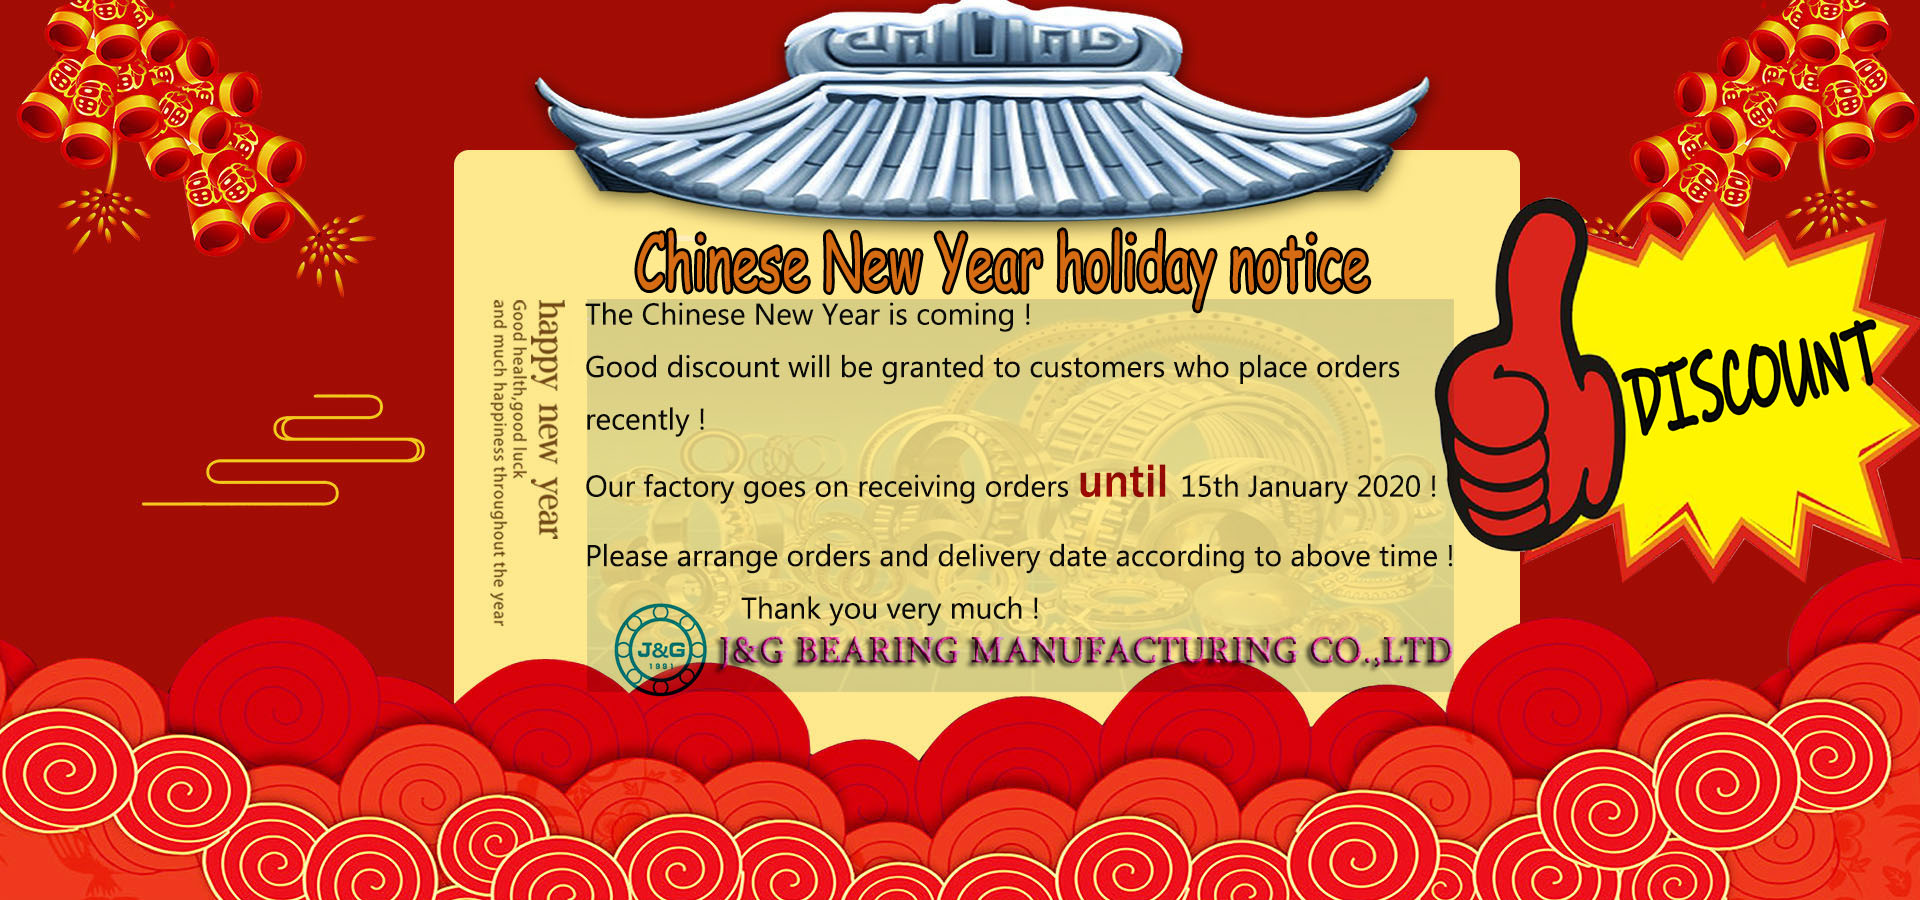 Big discount to customers before Chinese Happy New Year !